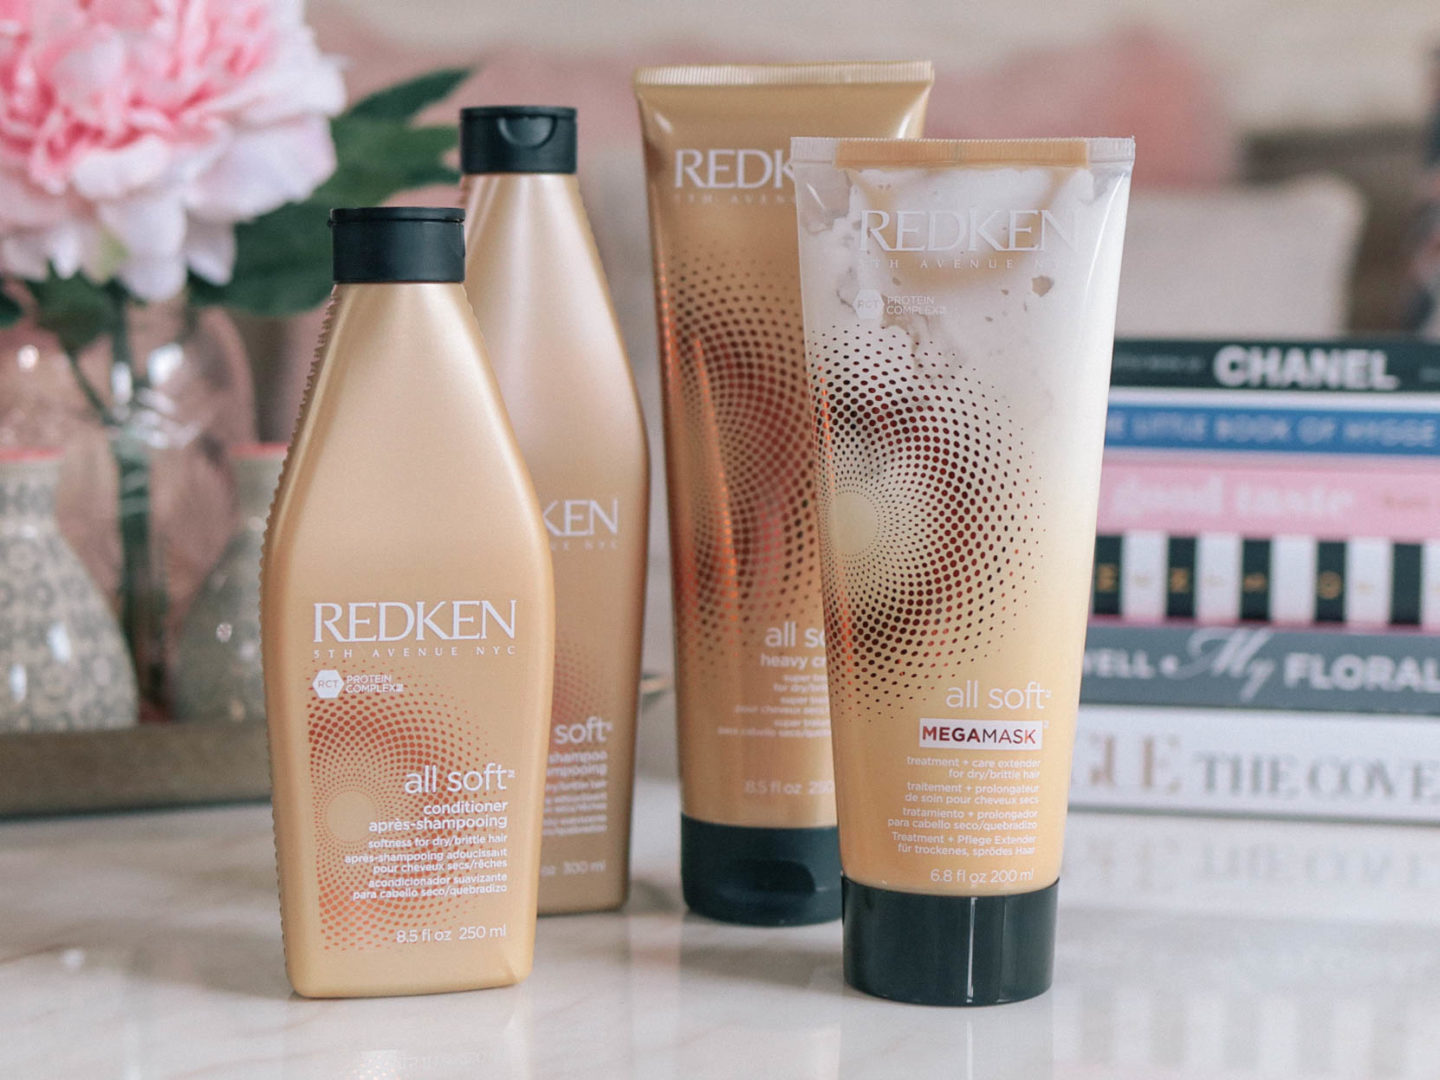 Leigha Gardner shares soft hair tips with Hair Cuttery and Redken's All Soft line